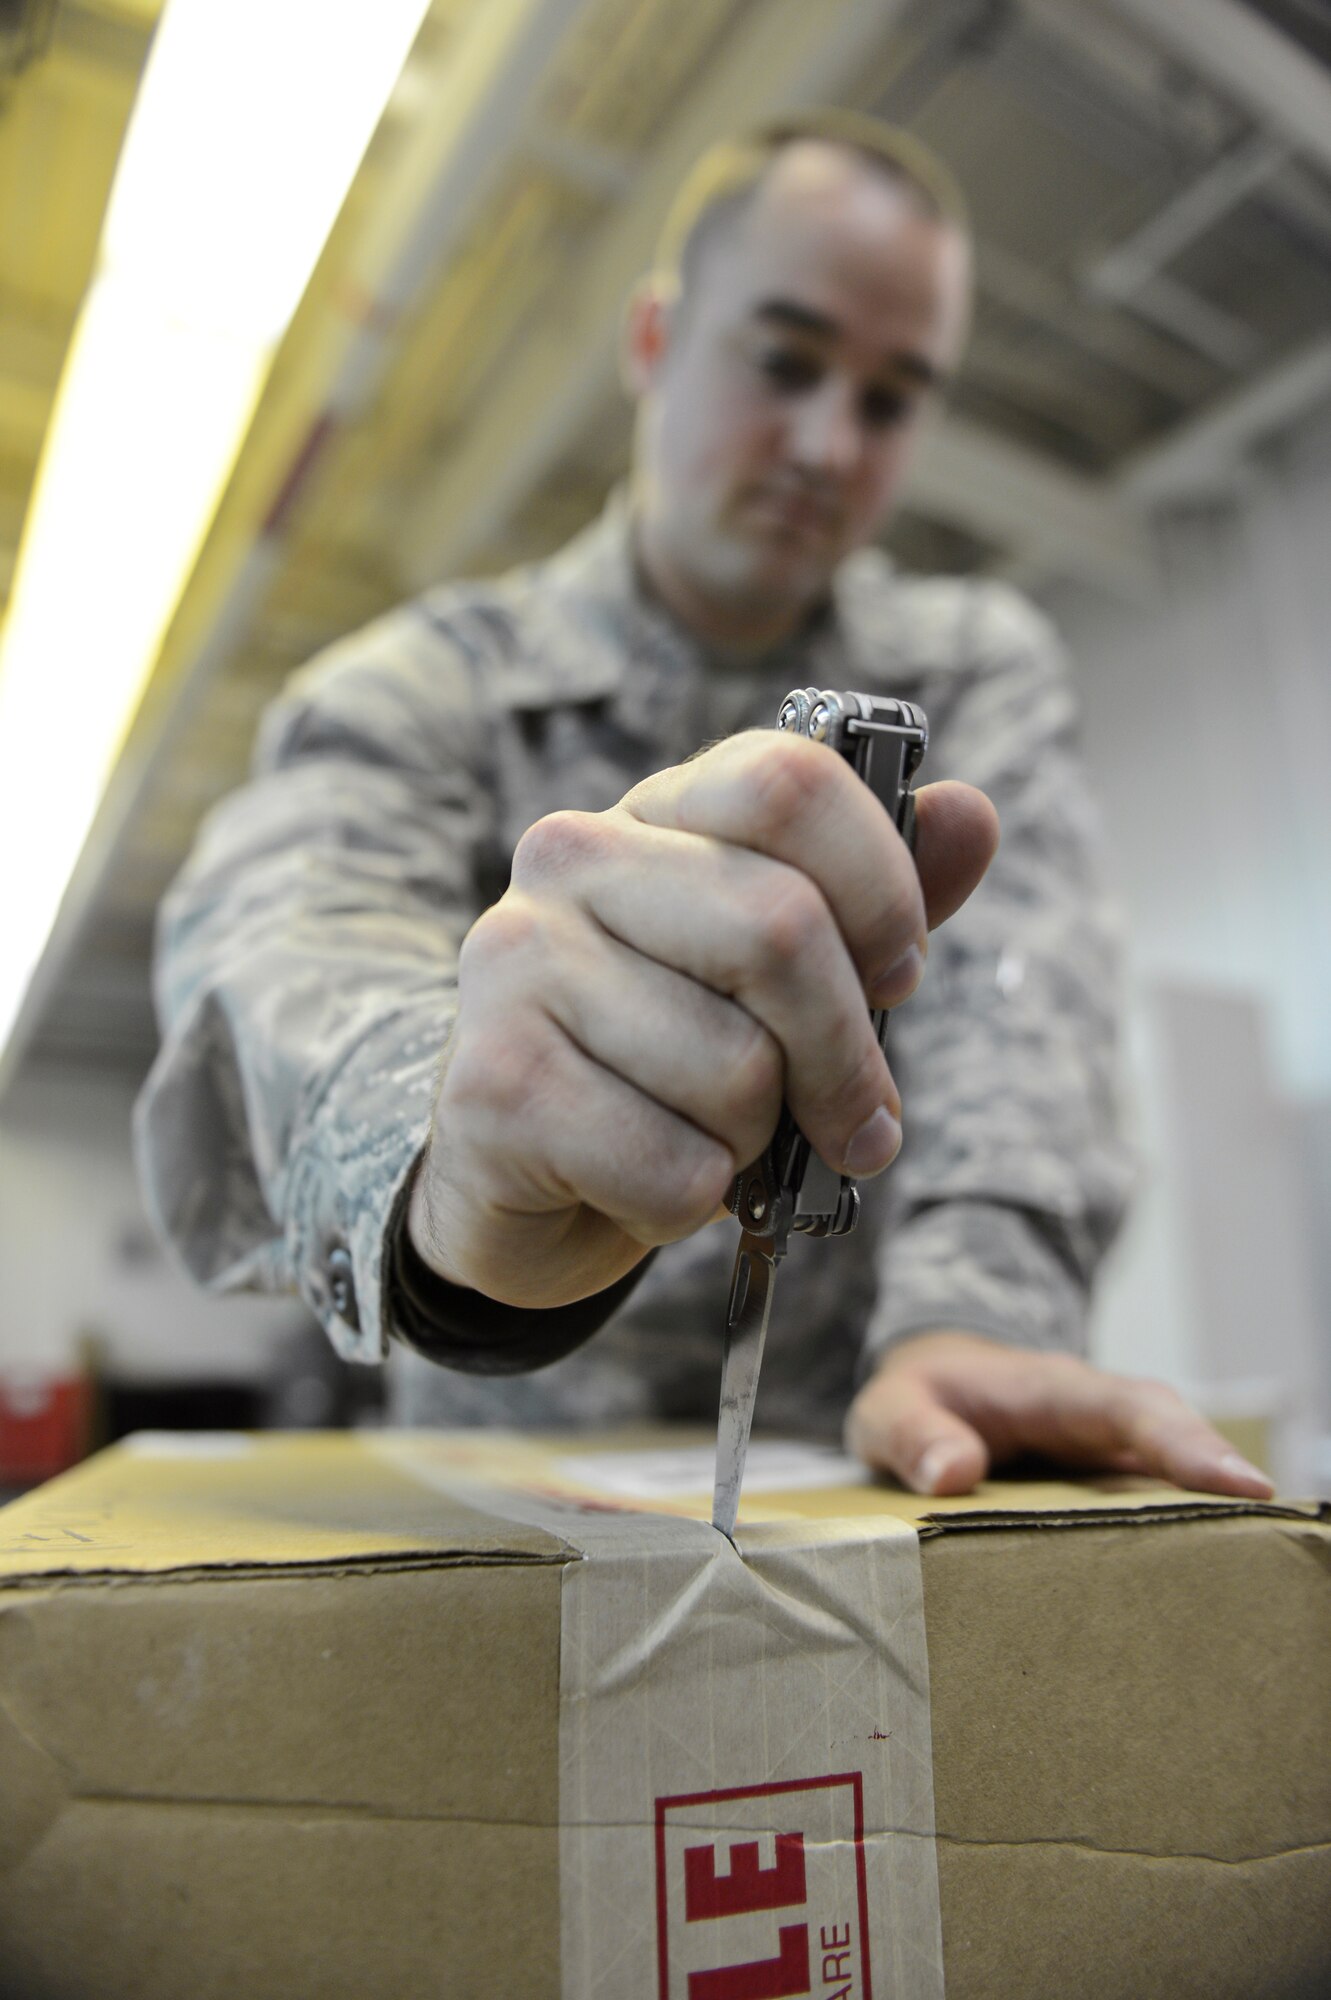 Airman 1st Class Jordan Williams, 2nd Medical Support Squadron Medical Logistics, opens a box on Barksdale Air Force Base, La., May 21, 2013. When supplies come in Medical Logistics Airmen open and check all boxes to ensure everything on the delivery receipt has been received. (U.S. Air Force photo/Senior Airman Micaiah Anthony)